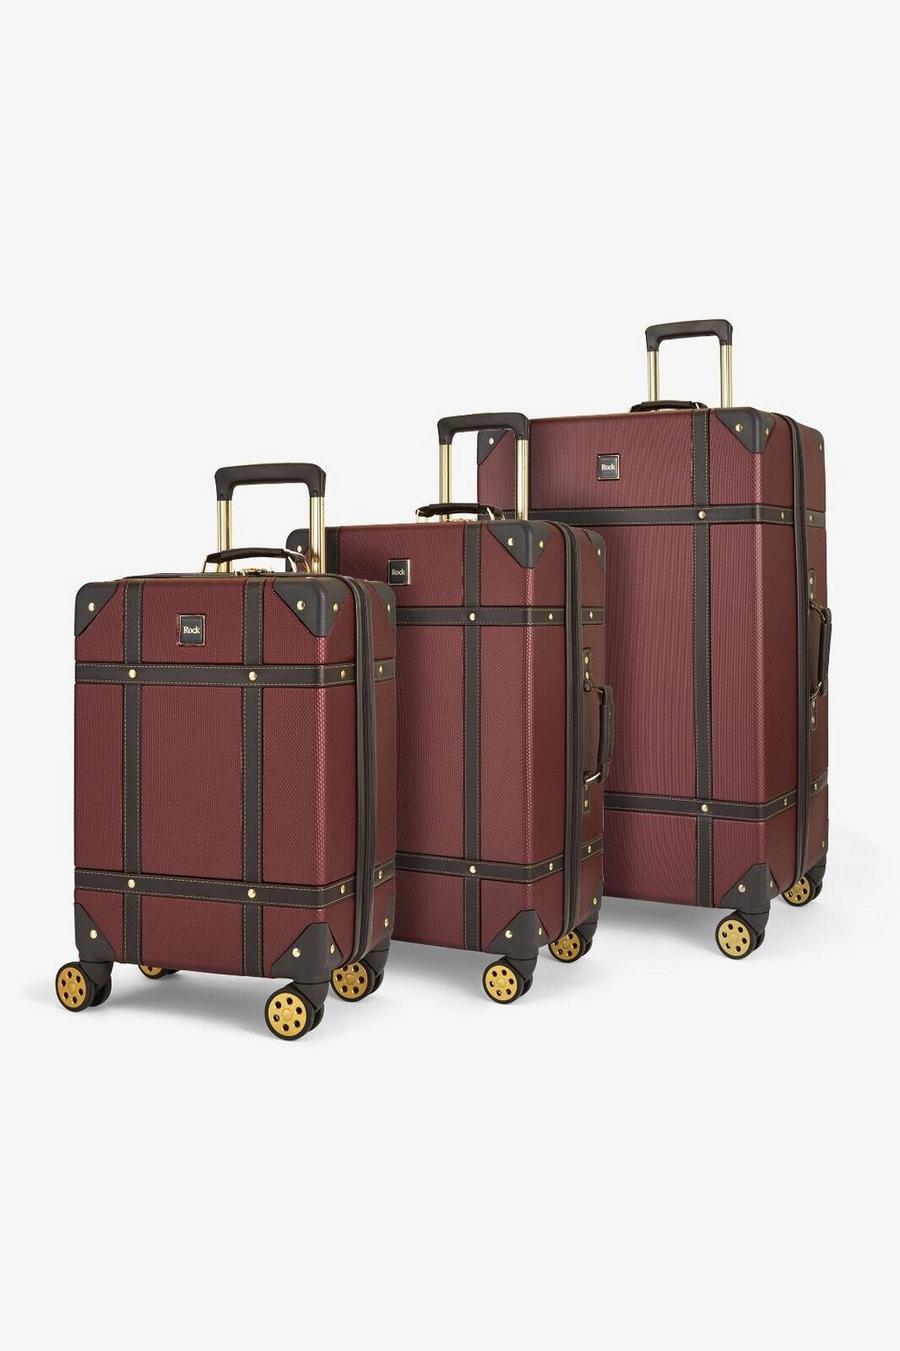 Burgundy Vintage Hard Shell Luggage Suitcase Trunk Cabin Travel Bags Set Of 3